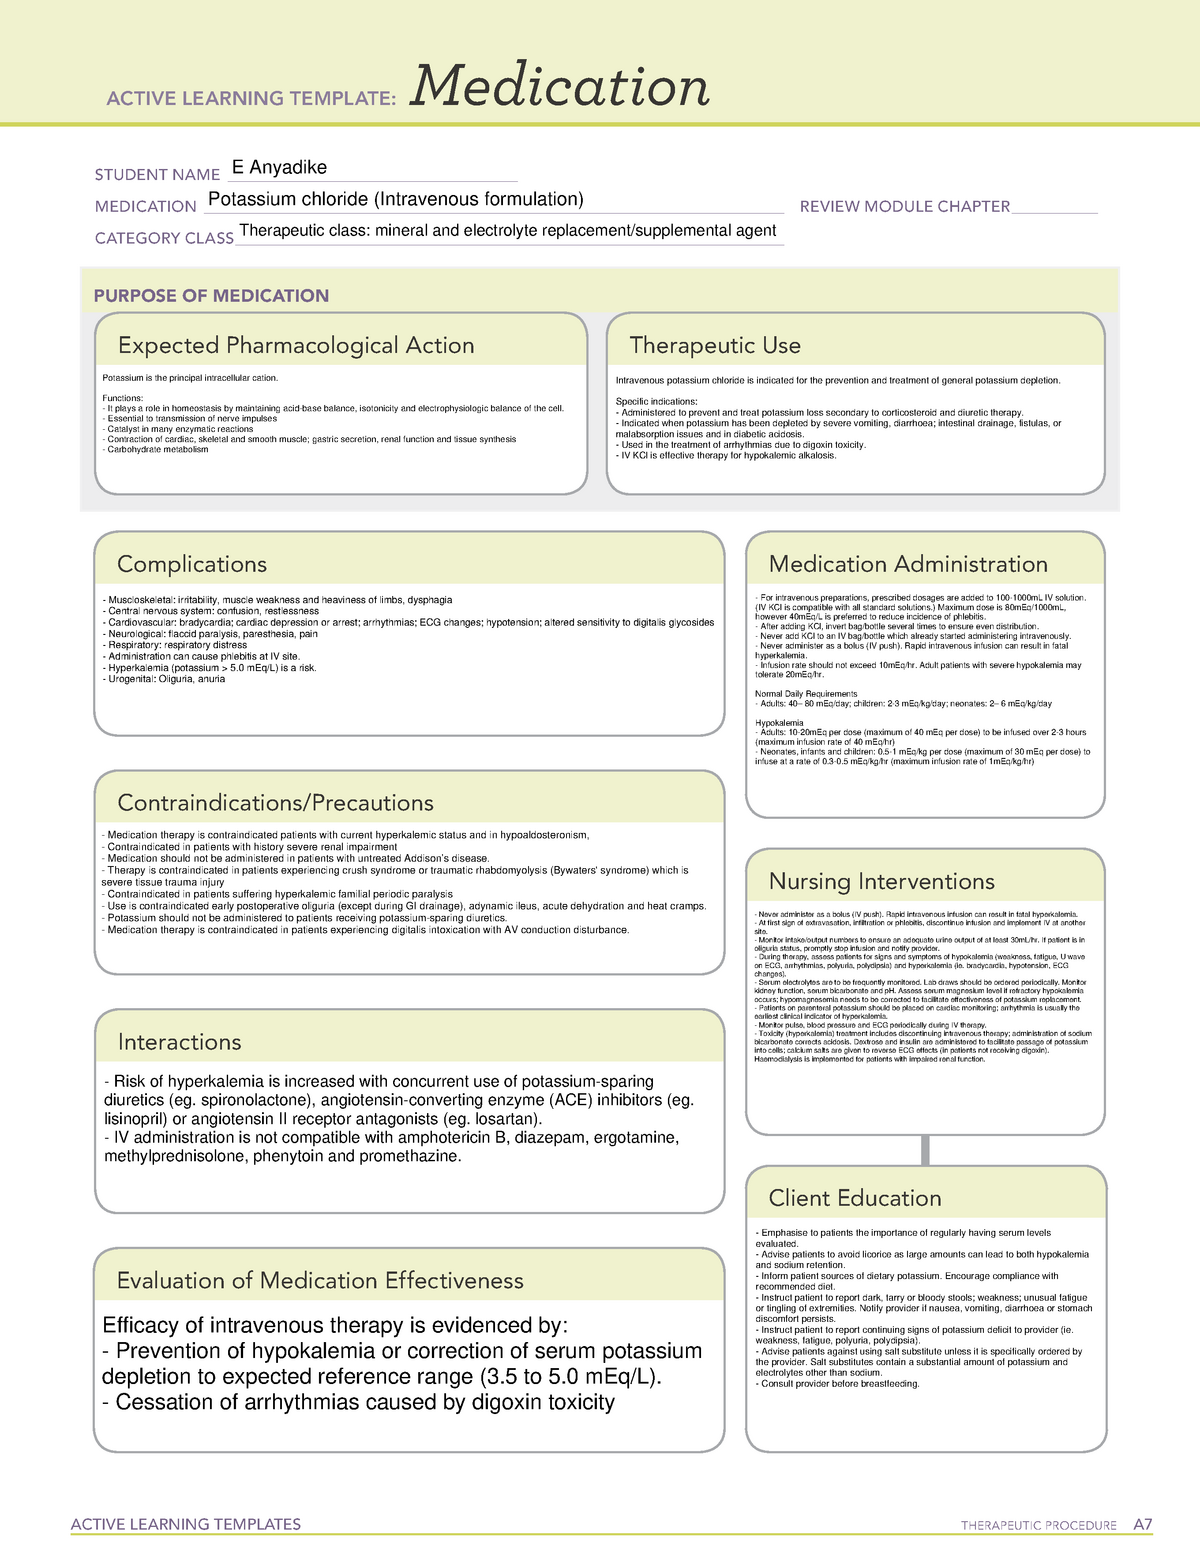 Active Learning Template IV potassium ACTIVE LEARNING TEMPLATES